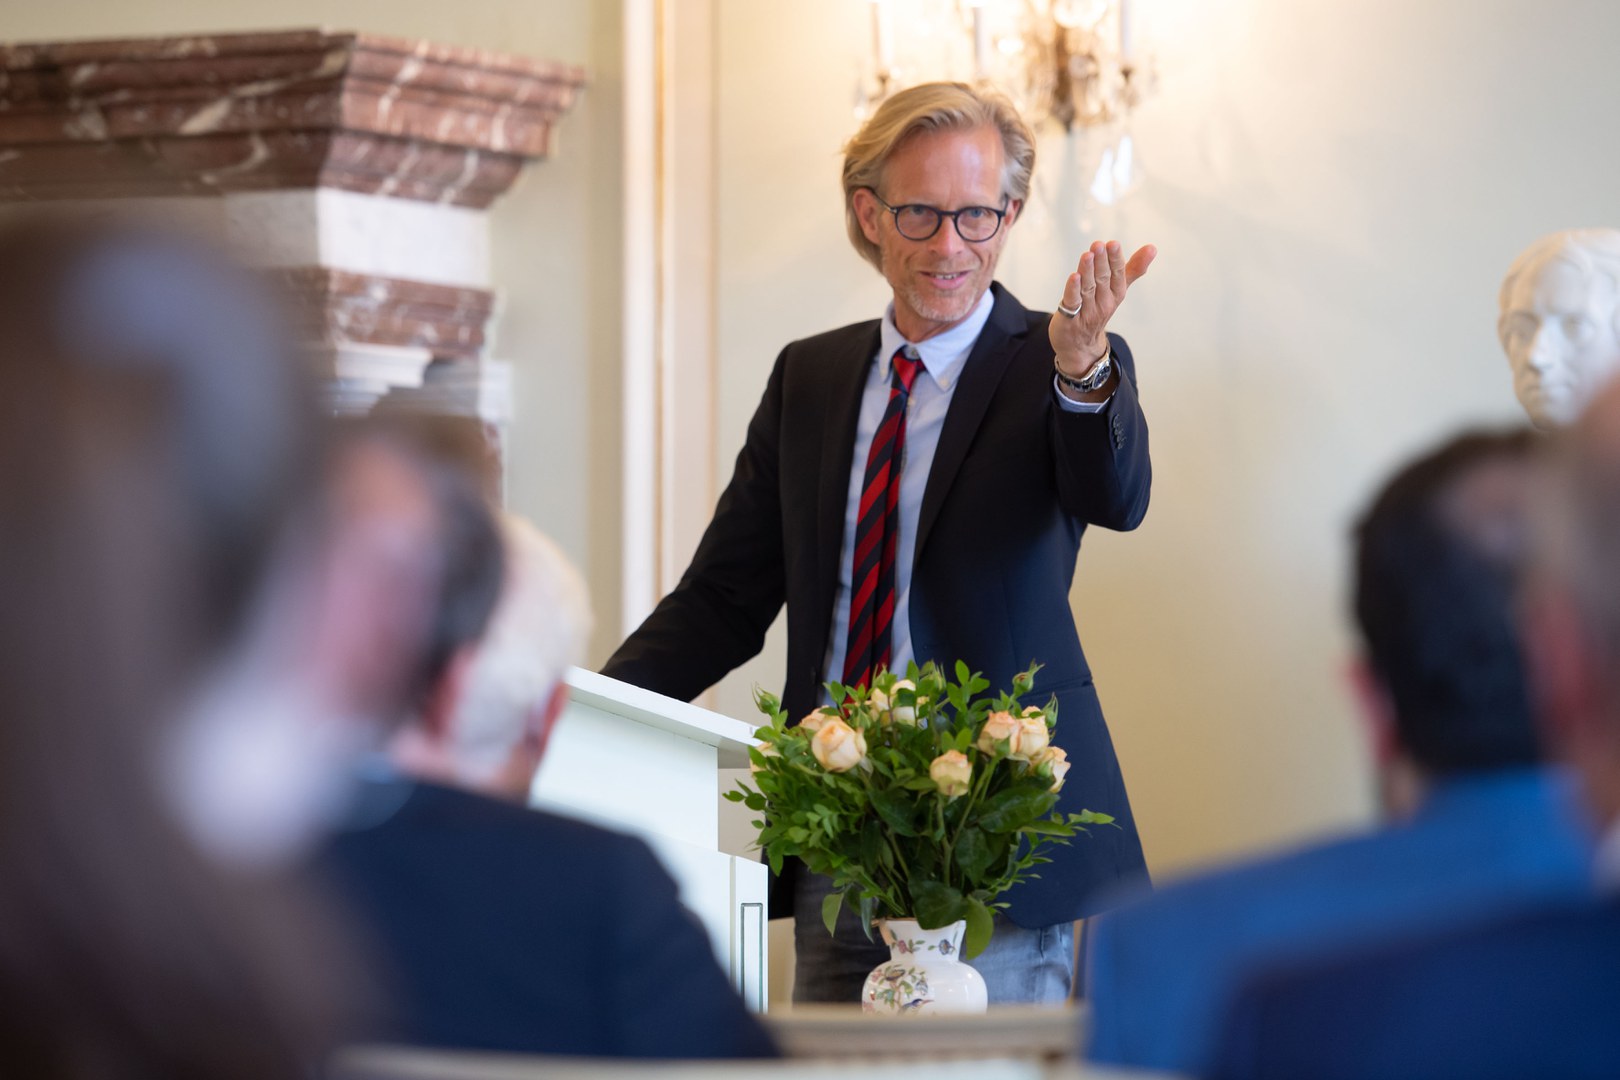 The center is organizationally anchored in the Faculty of Philosophy. Dean Prof. Dr. Volker Kronenberg spoke to the guests in a welcoming speech.